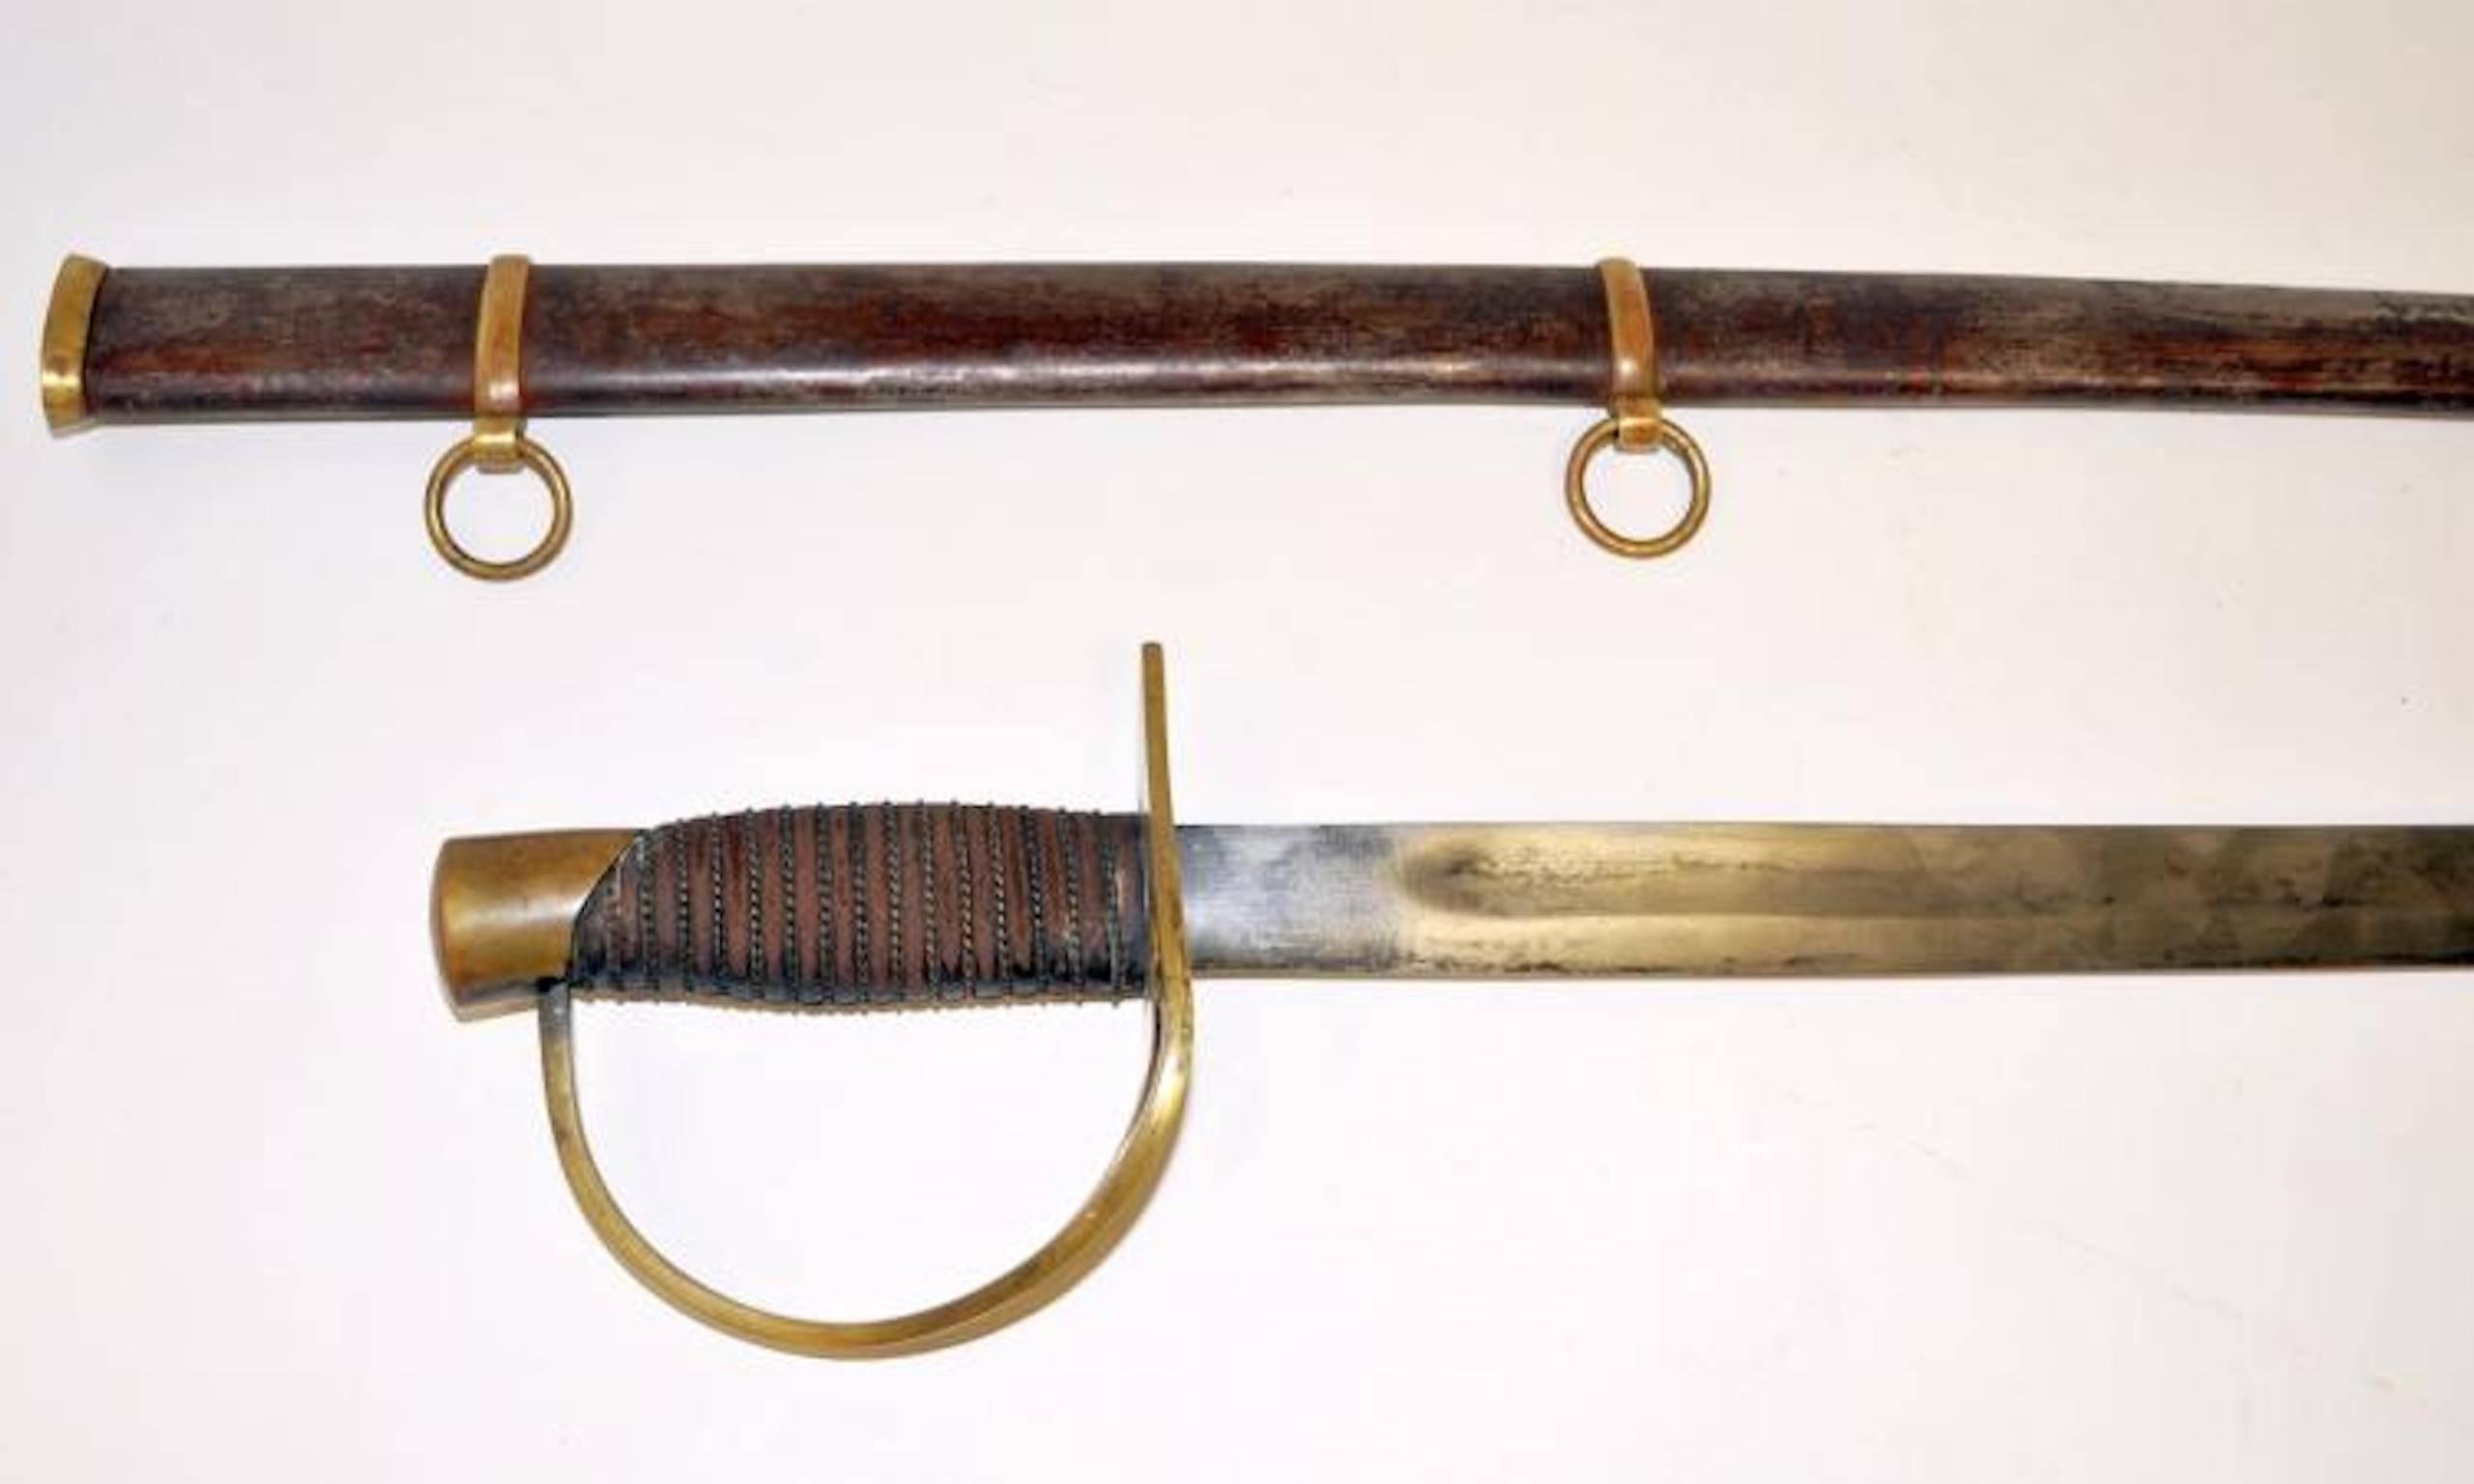 Antique civil war sword with iron scabbard. The steel blade and brass hilt are unmarked. No strap. 41